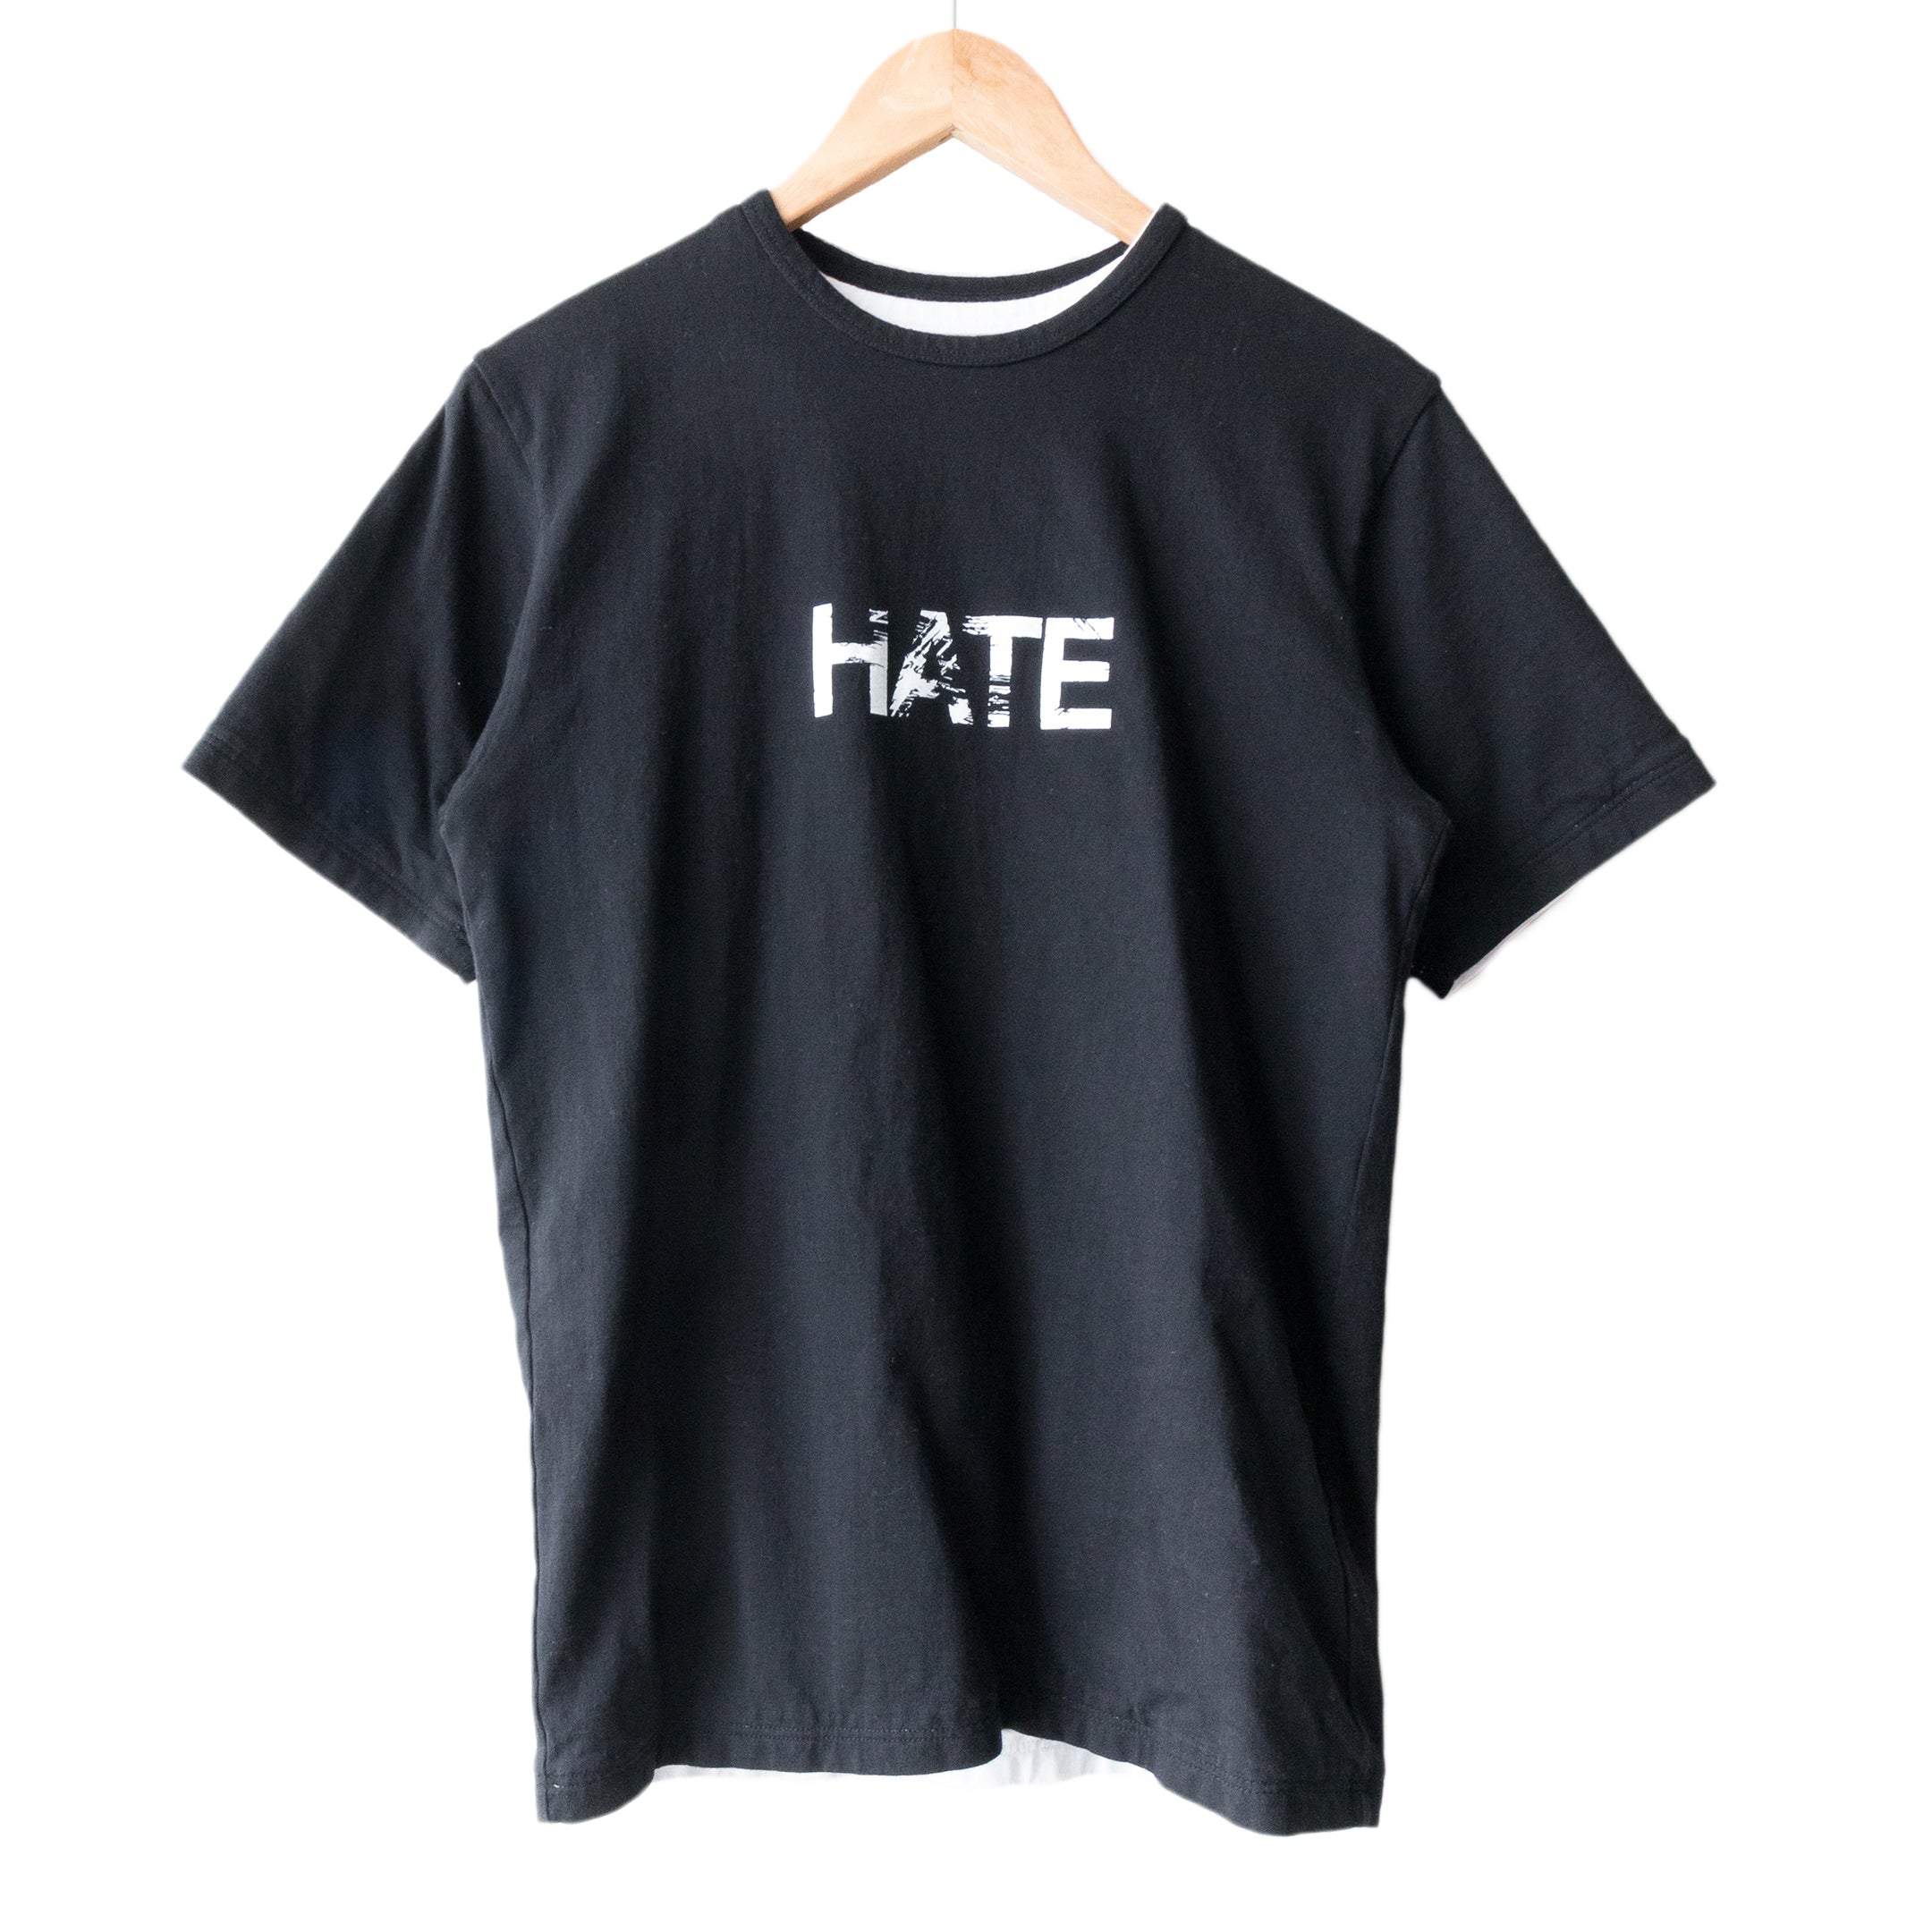 Undercover Love Hate Tee - AW99 